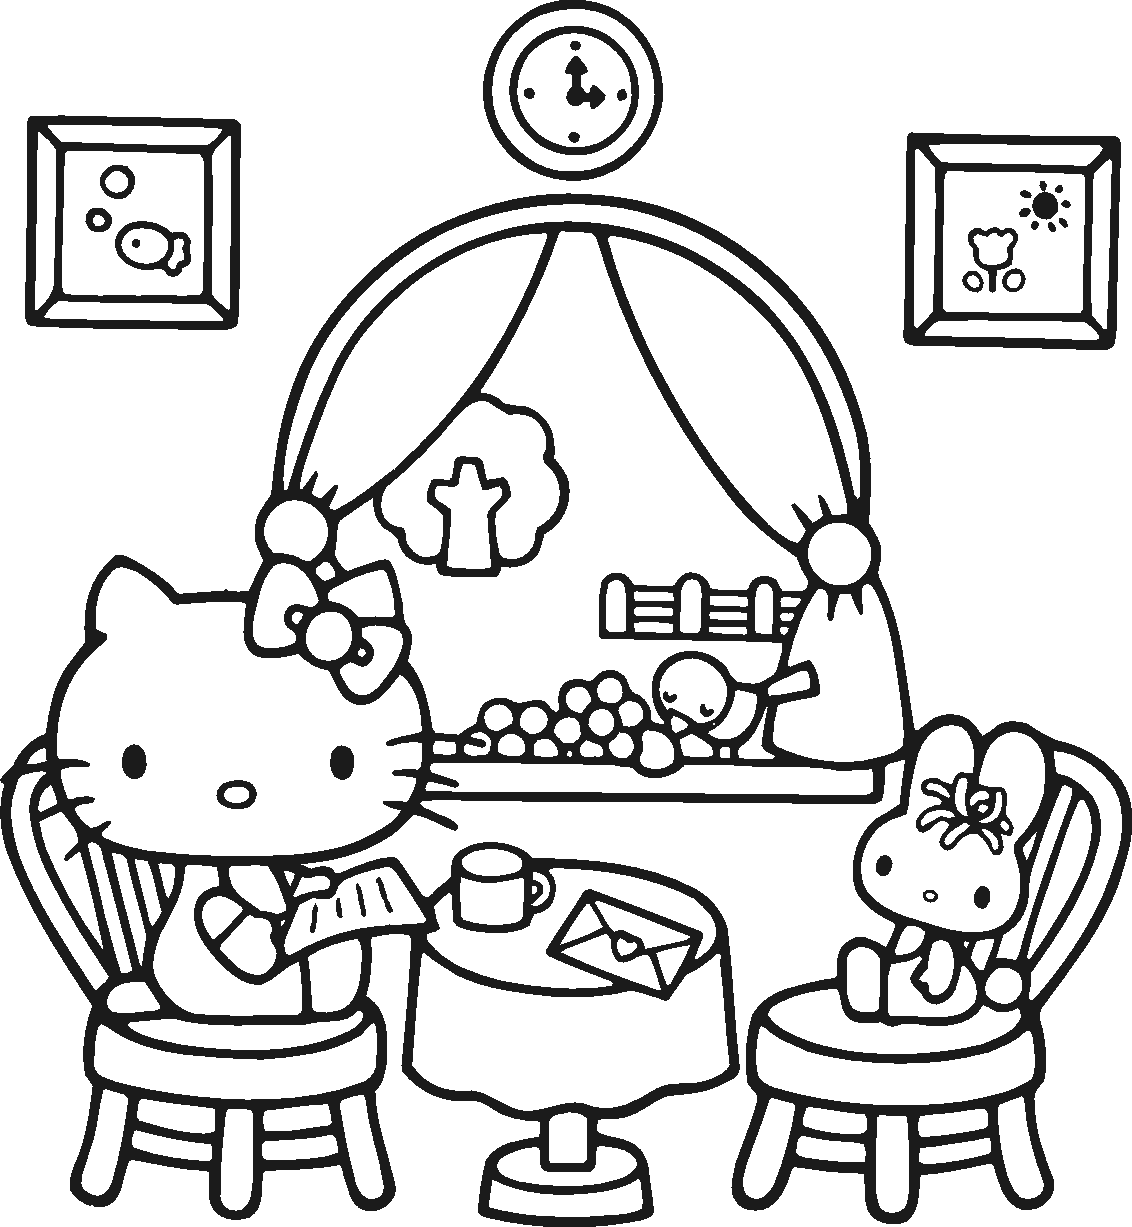 free-free-hello-kitty-valentine-coloring-pages-download-free-free